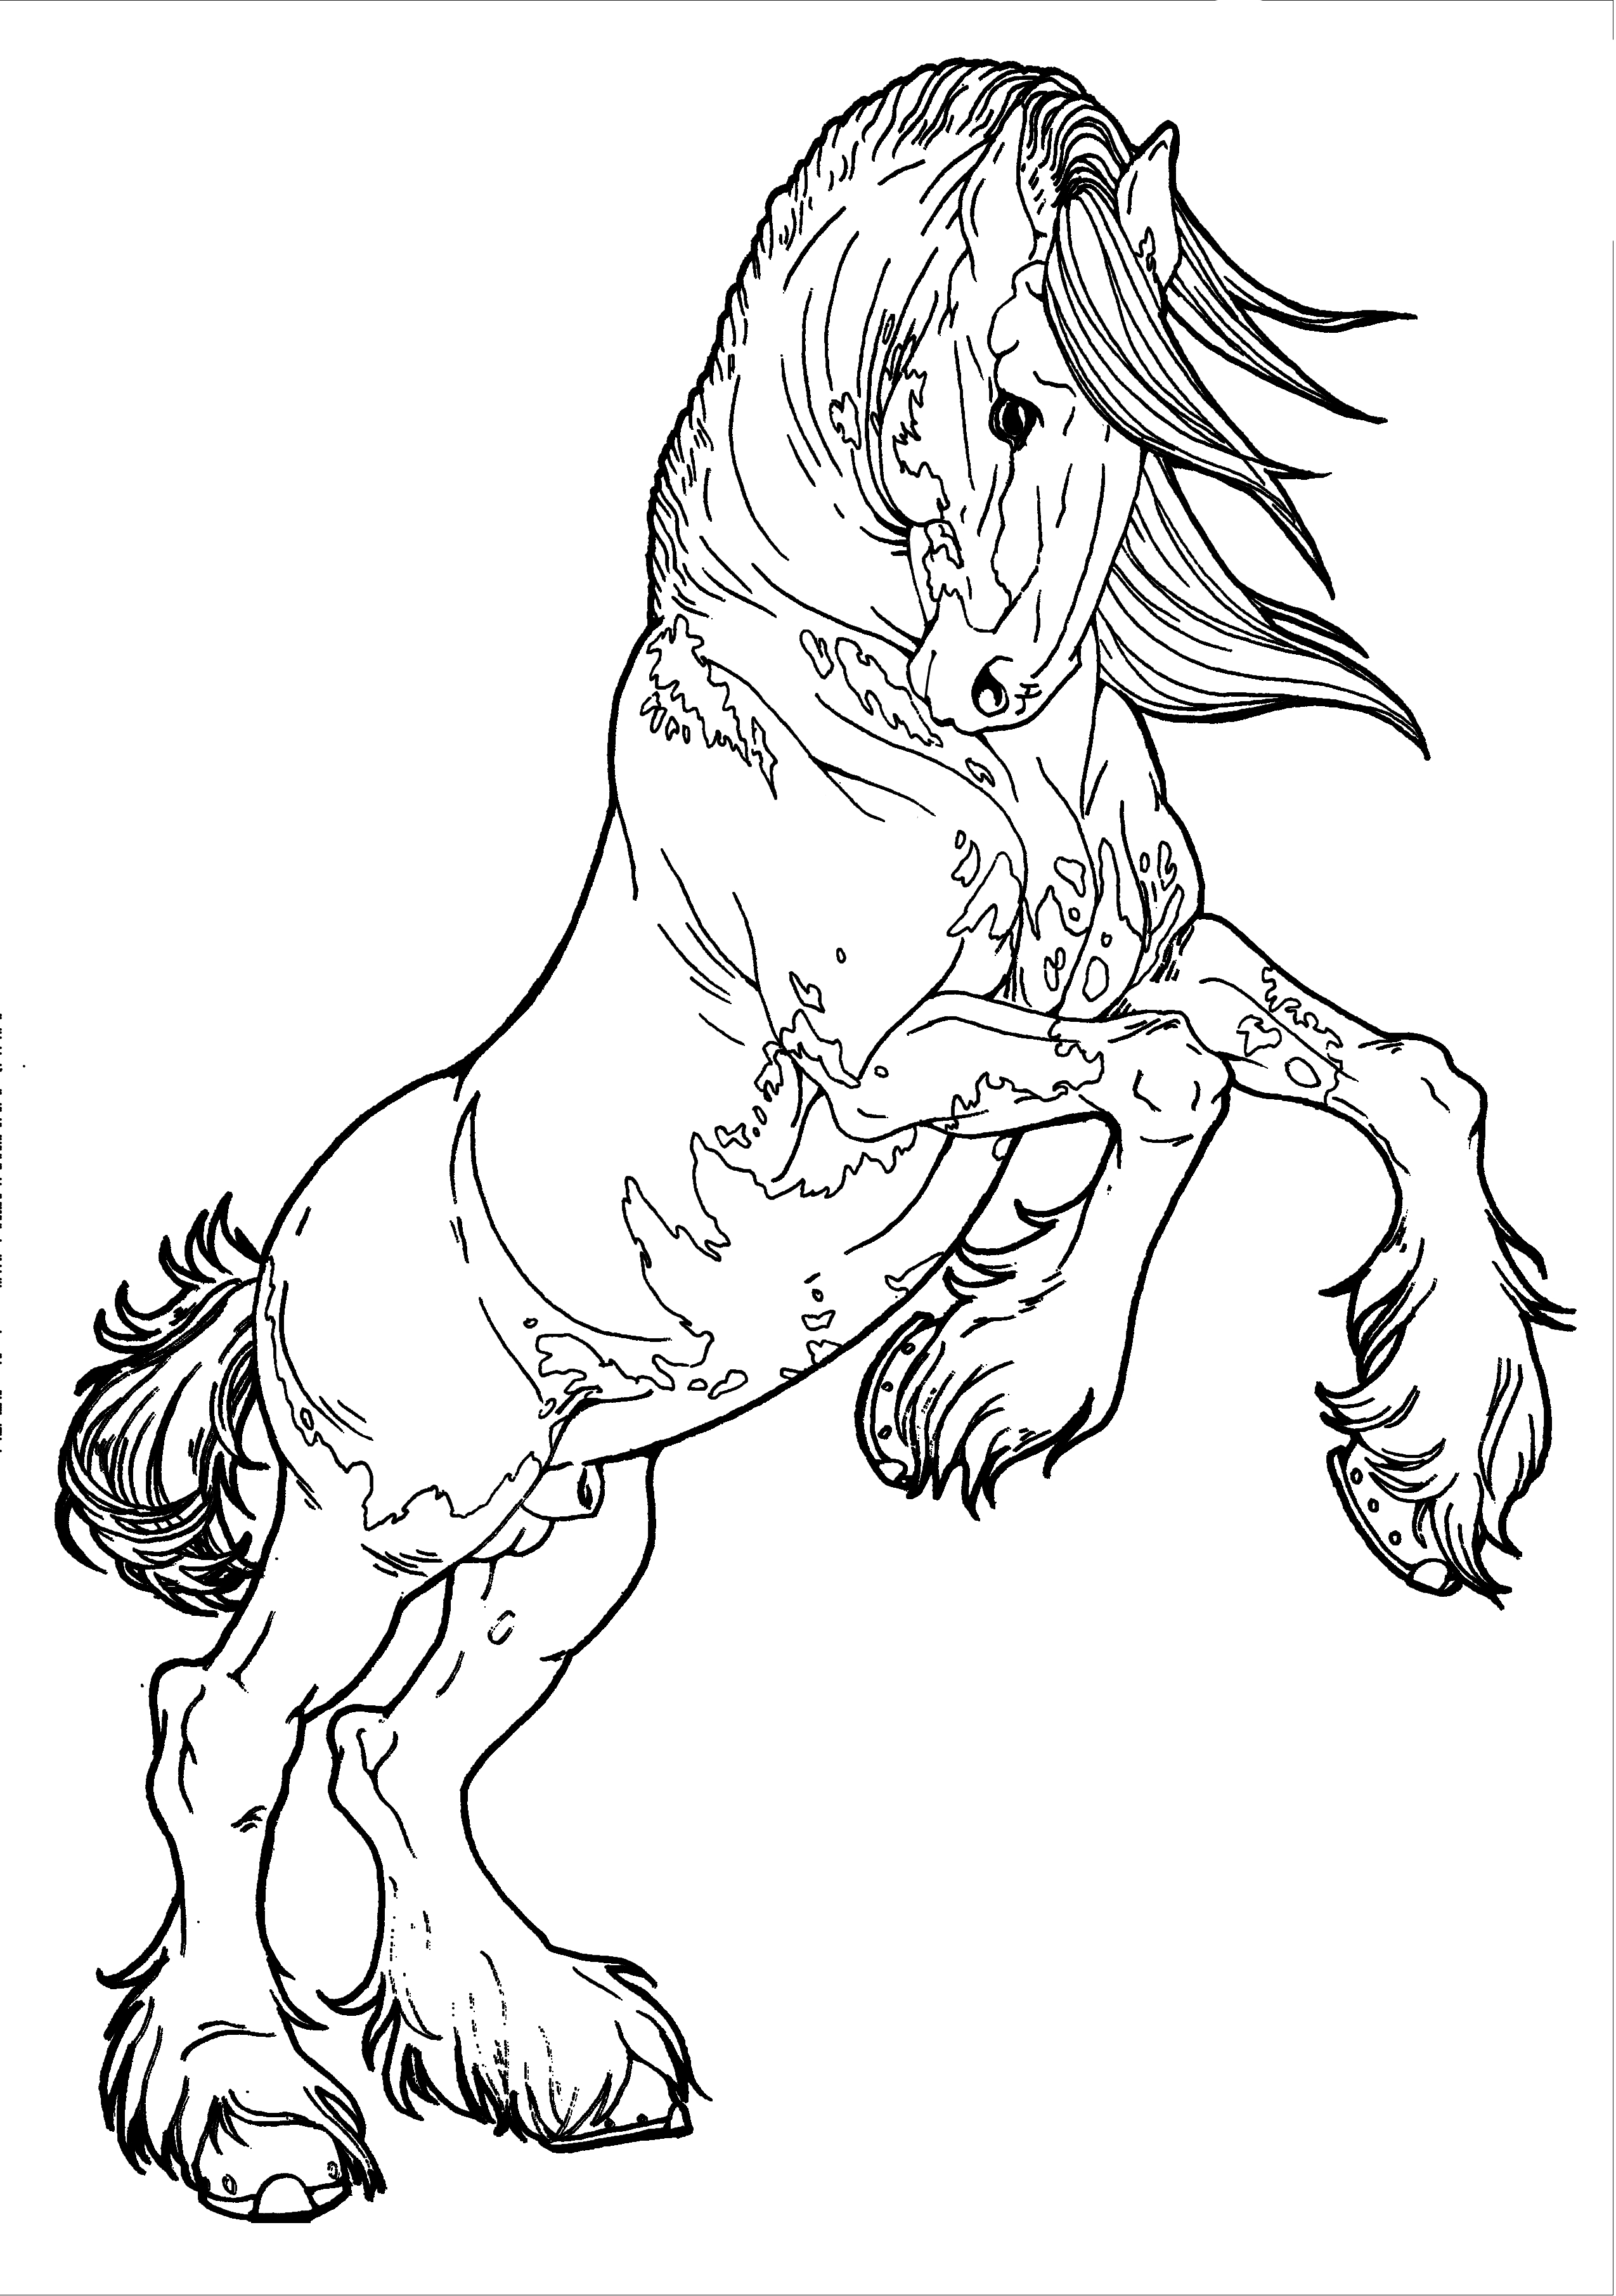 Realistic Horse Coloring Pages - AeroGrafiaOnline